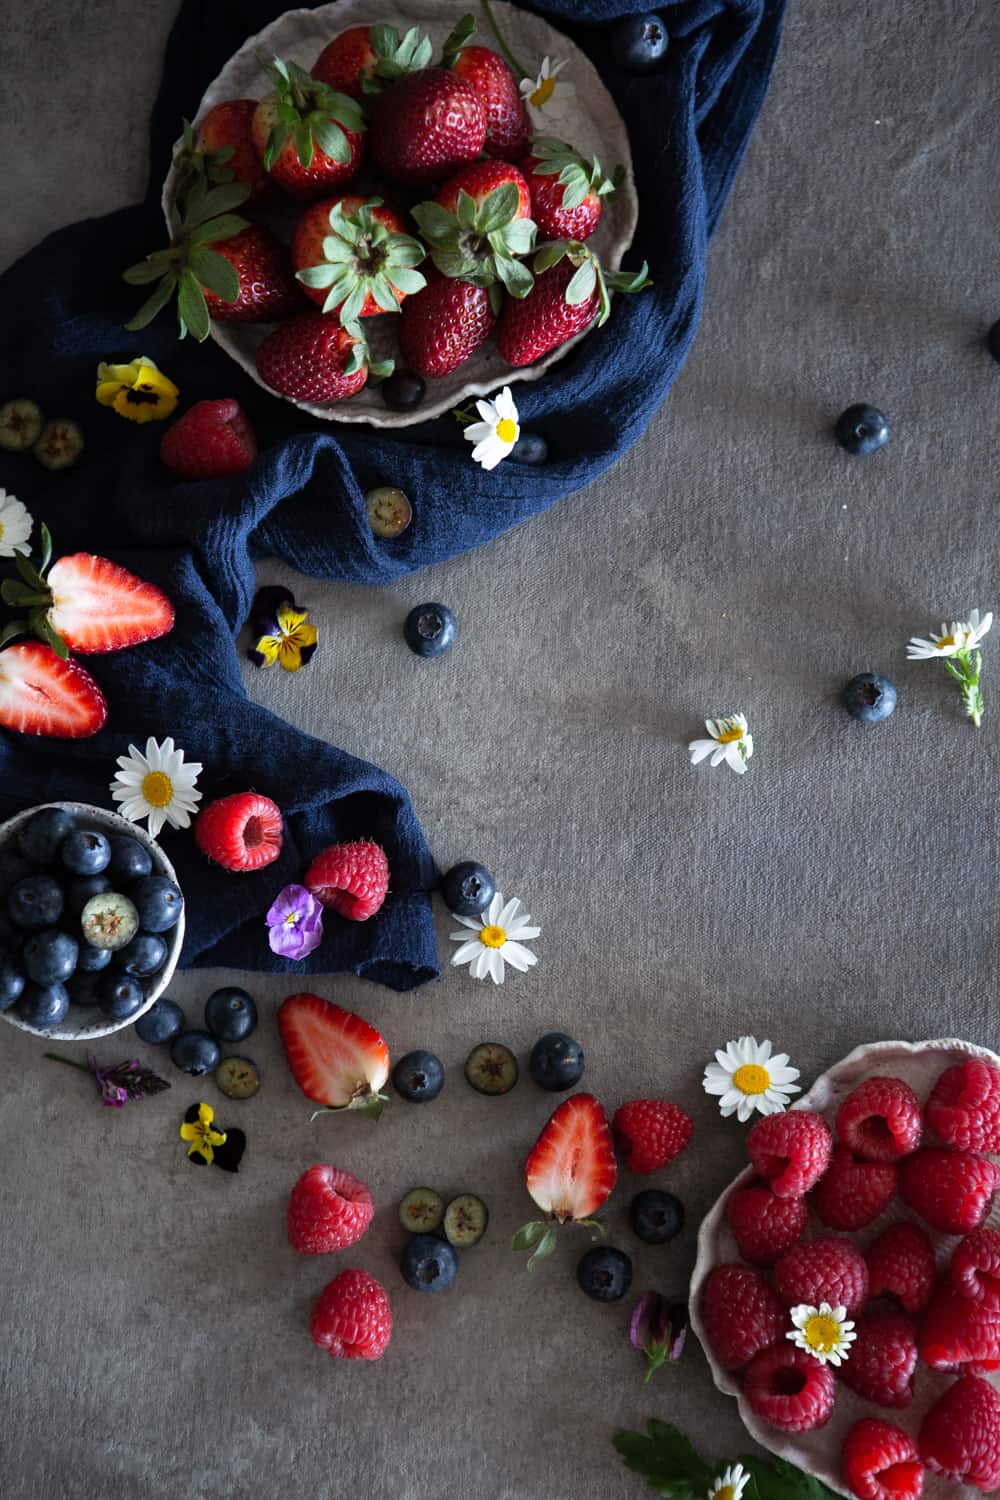 Berries and edible flowers shot from above